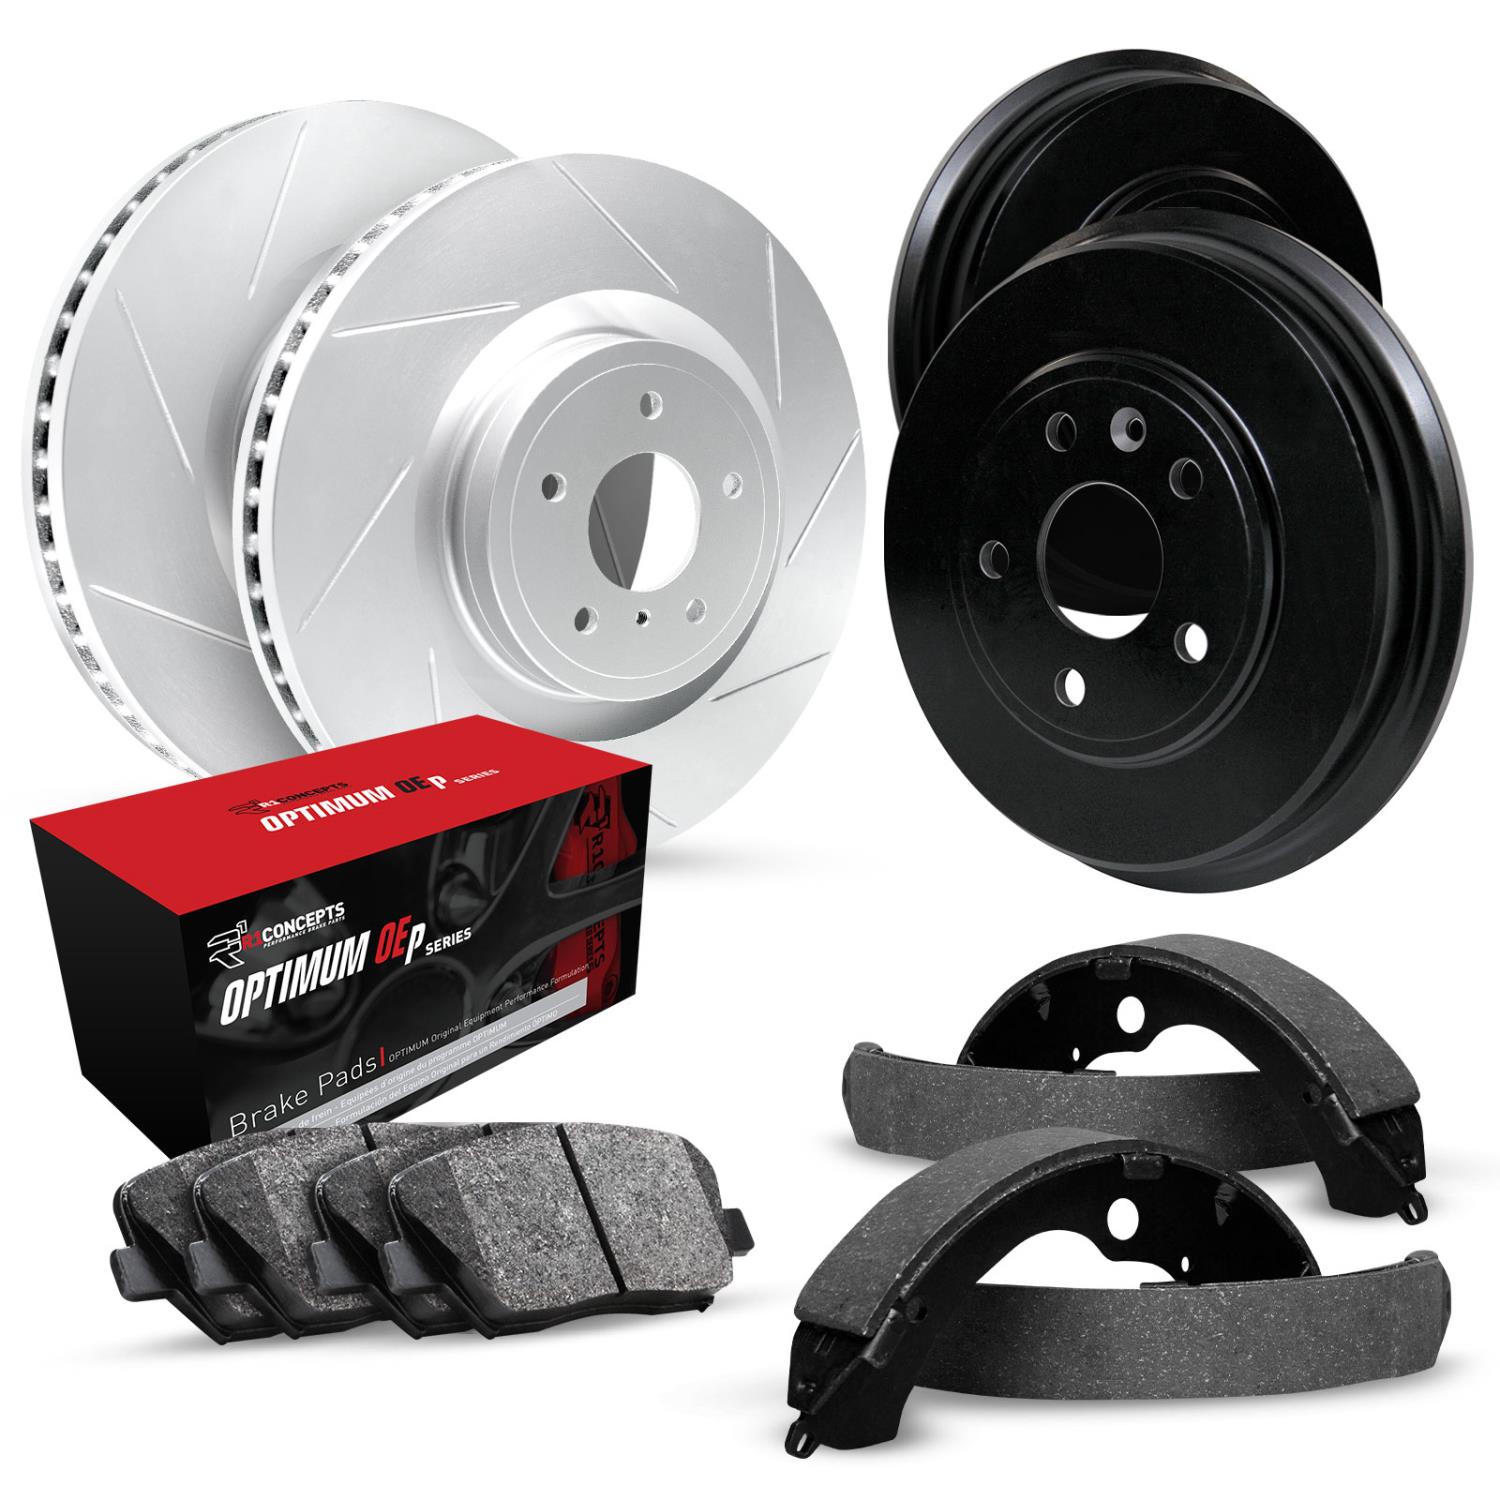 GEO-Carbon Slotted Brake Rotor & Drum Set w/Optimum OE Pads & Shoes, 1984-1992 GM, Position: Front & Rear